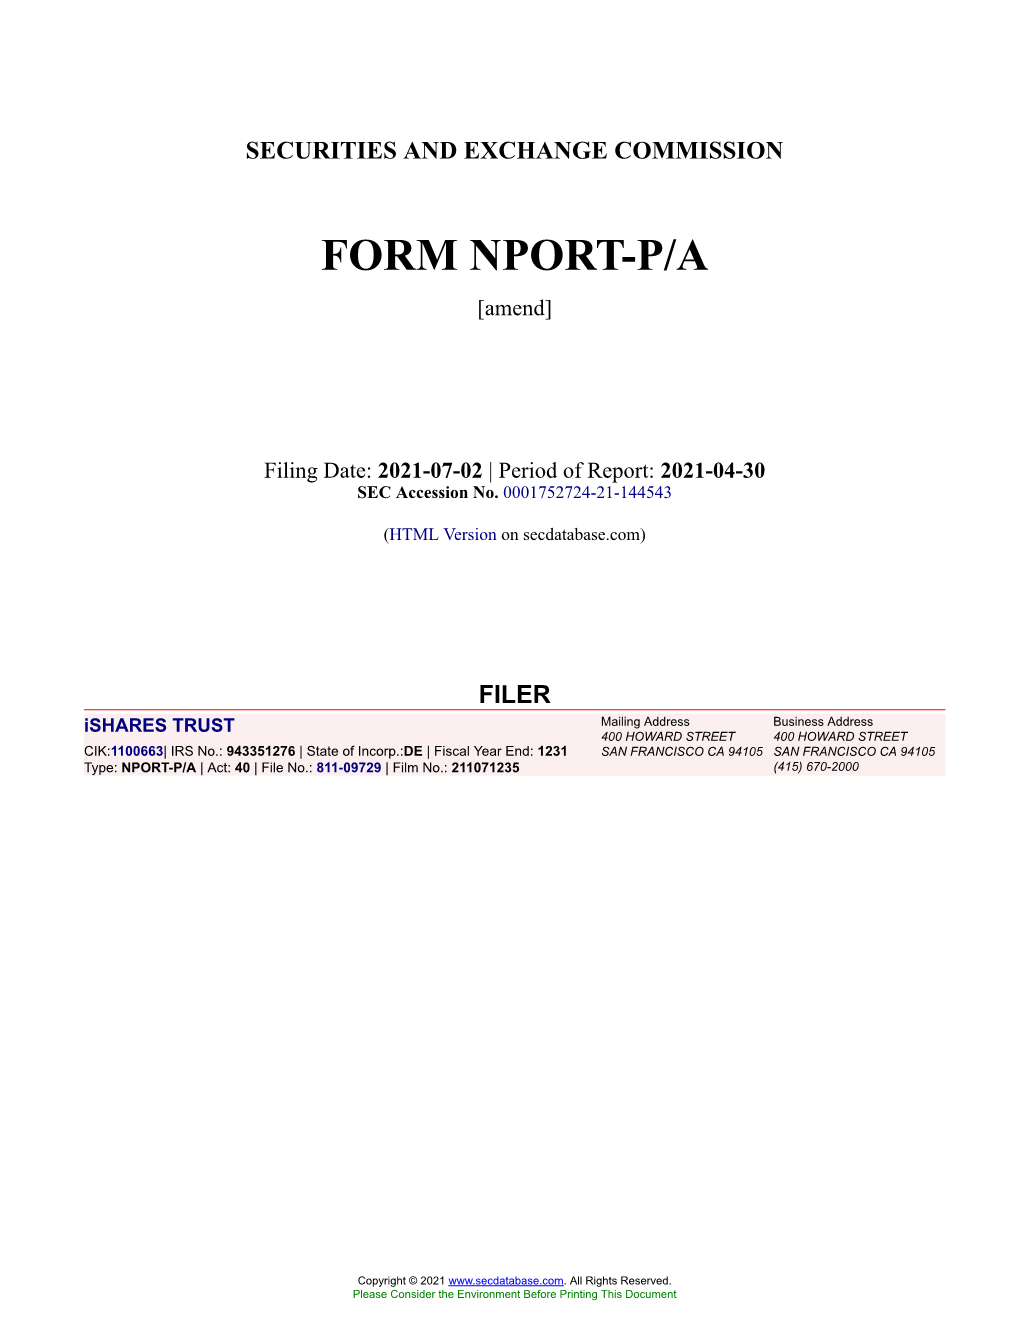 Ishares TRUST Form NPORT-P/A Filed 2021-07-02